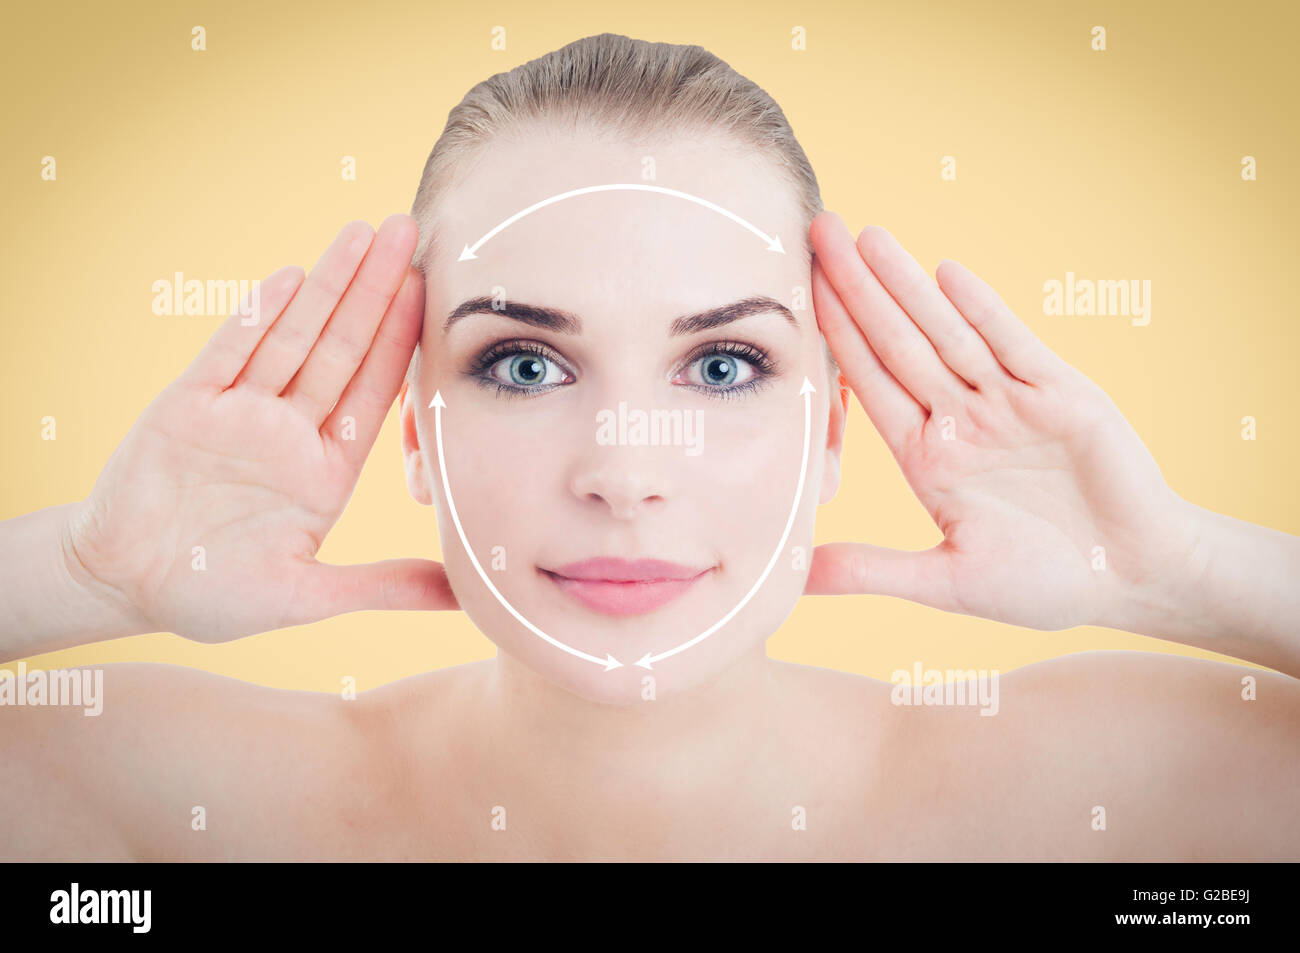 Beautiful smiling woman face ready for cosmetic surgery against orange or yellow background Stock Photo